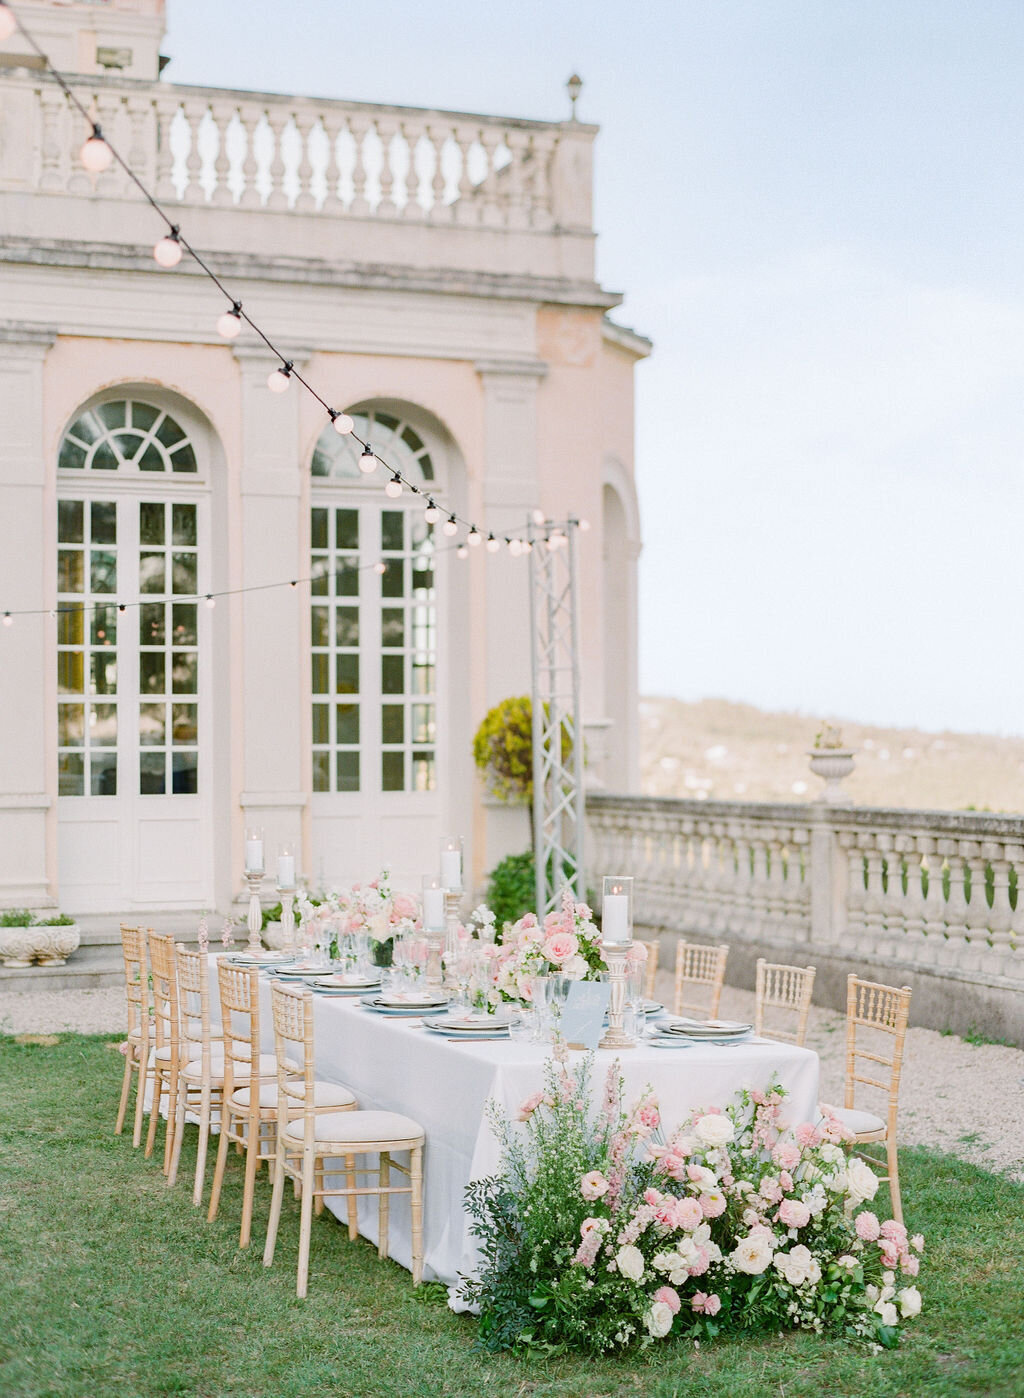 Jennifer Fox Weddings English speaking wedding planning & design agency in France crafting refined and bespoke weddings and celebrations Provence, Paris and destination Alyssa-Aaron-Wedding-Molly-Carr-Photography-Dinner-4